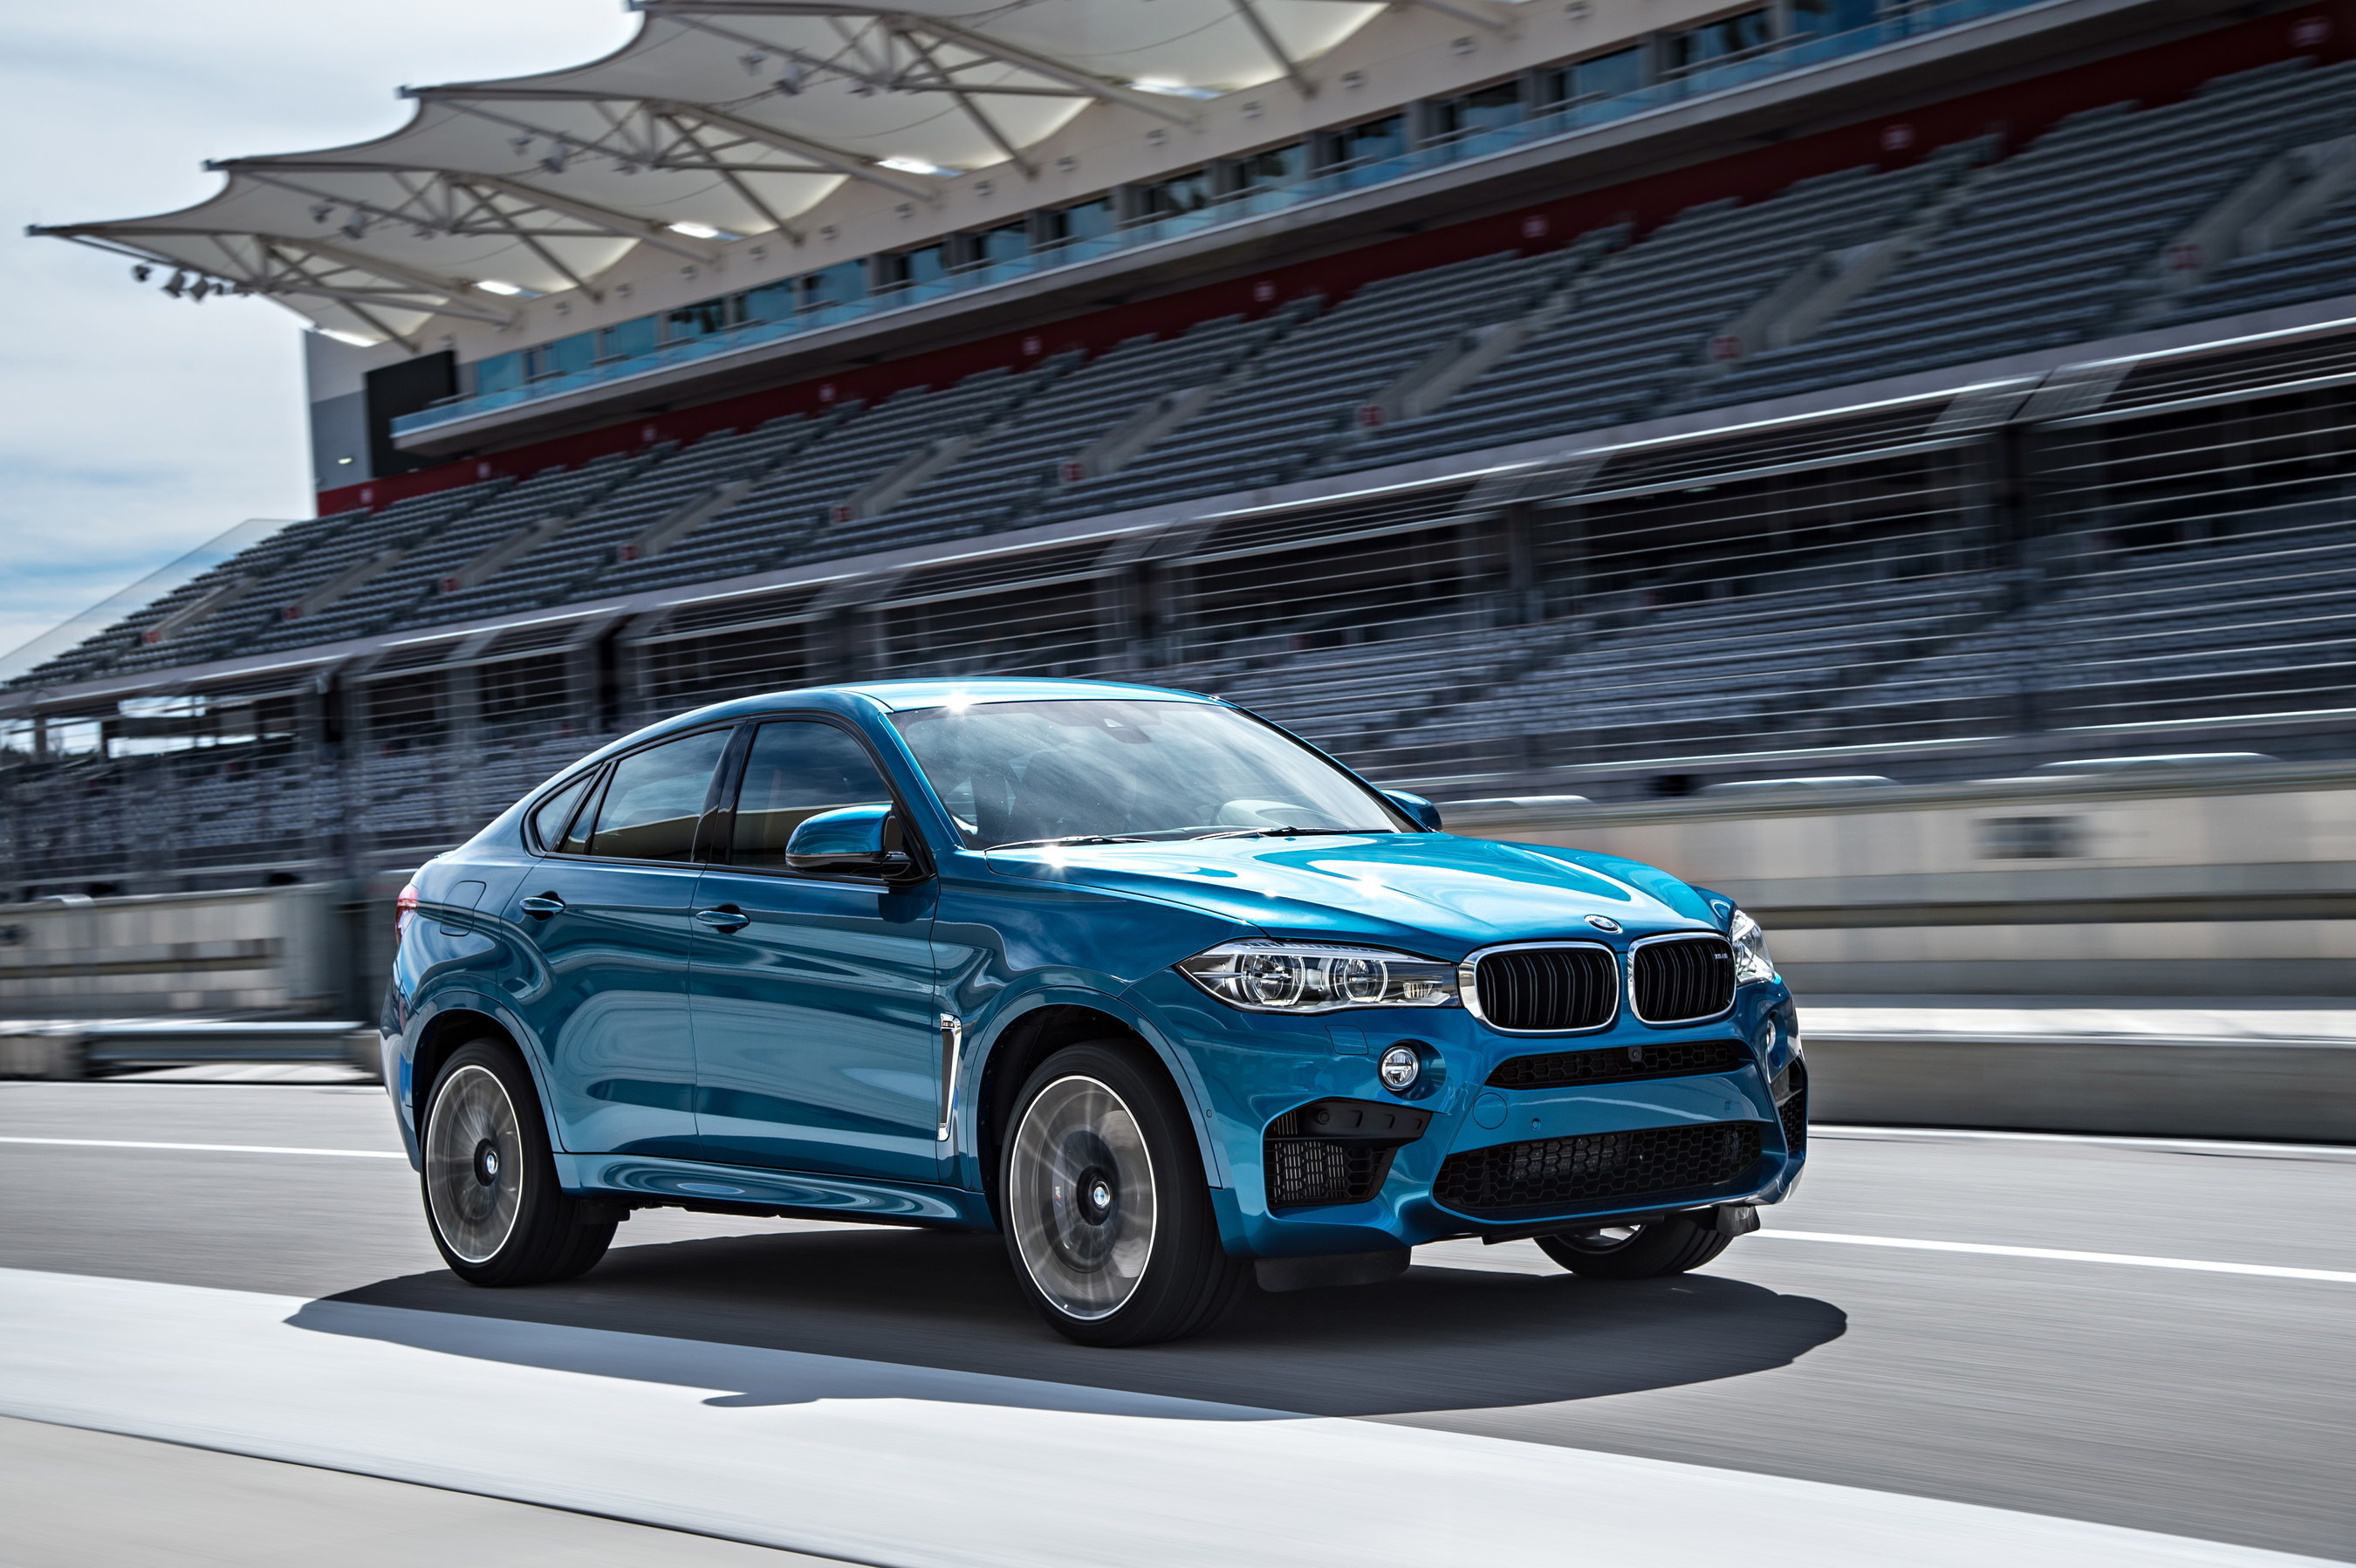 In July 3,648 customers took delivery of a BMW X6, up 71.5% on the same month last year (PRNewsFoto/BMW Group) (PRNewsFoto/BMW Group)